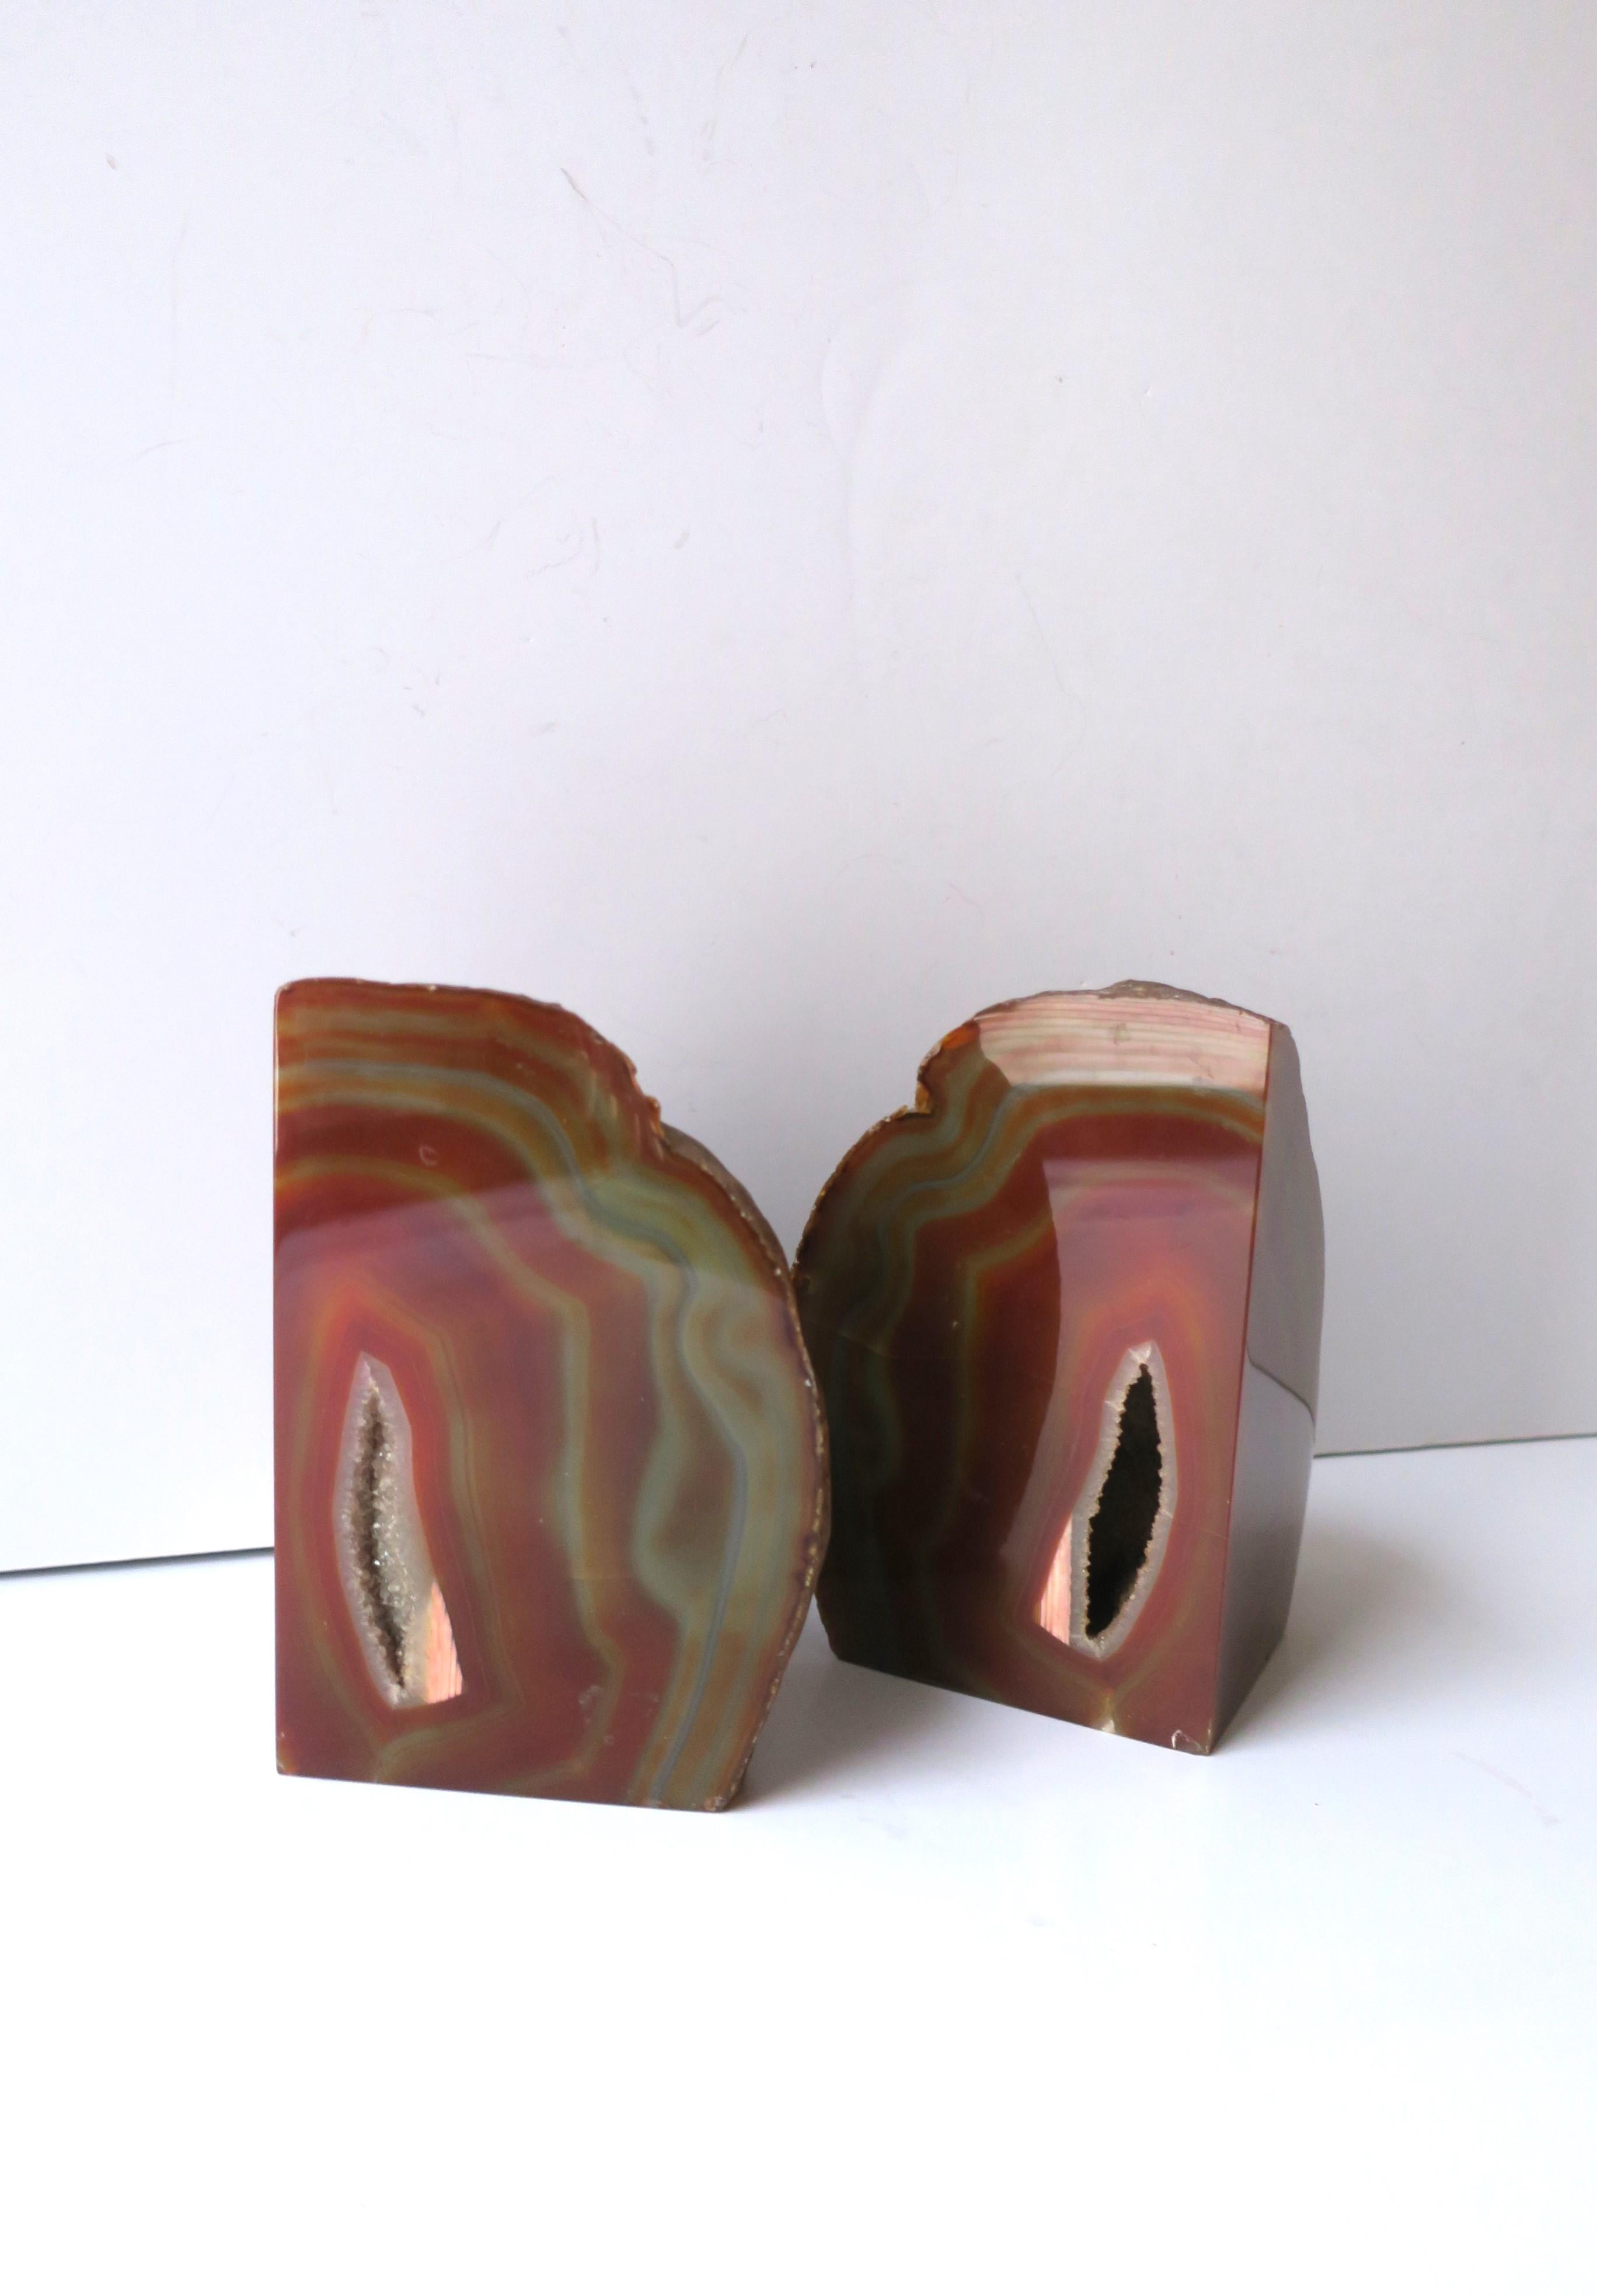 A substantial and beautiful pair of red burgundy agate onyx bookends or decorative objects, in the modern or Organic Modern style, circa late-20th century. Demonstrated supporting coffee table books. Very good condition as shown in images. Pair are